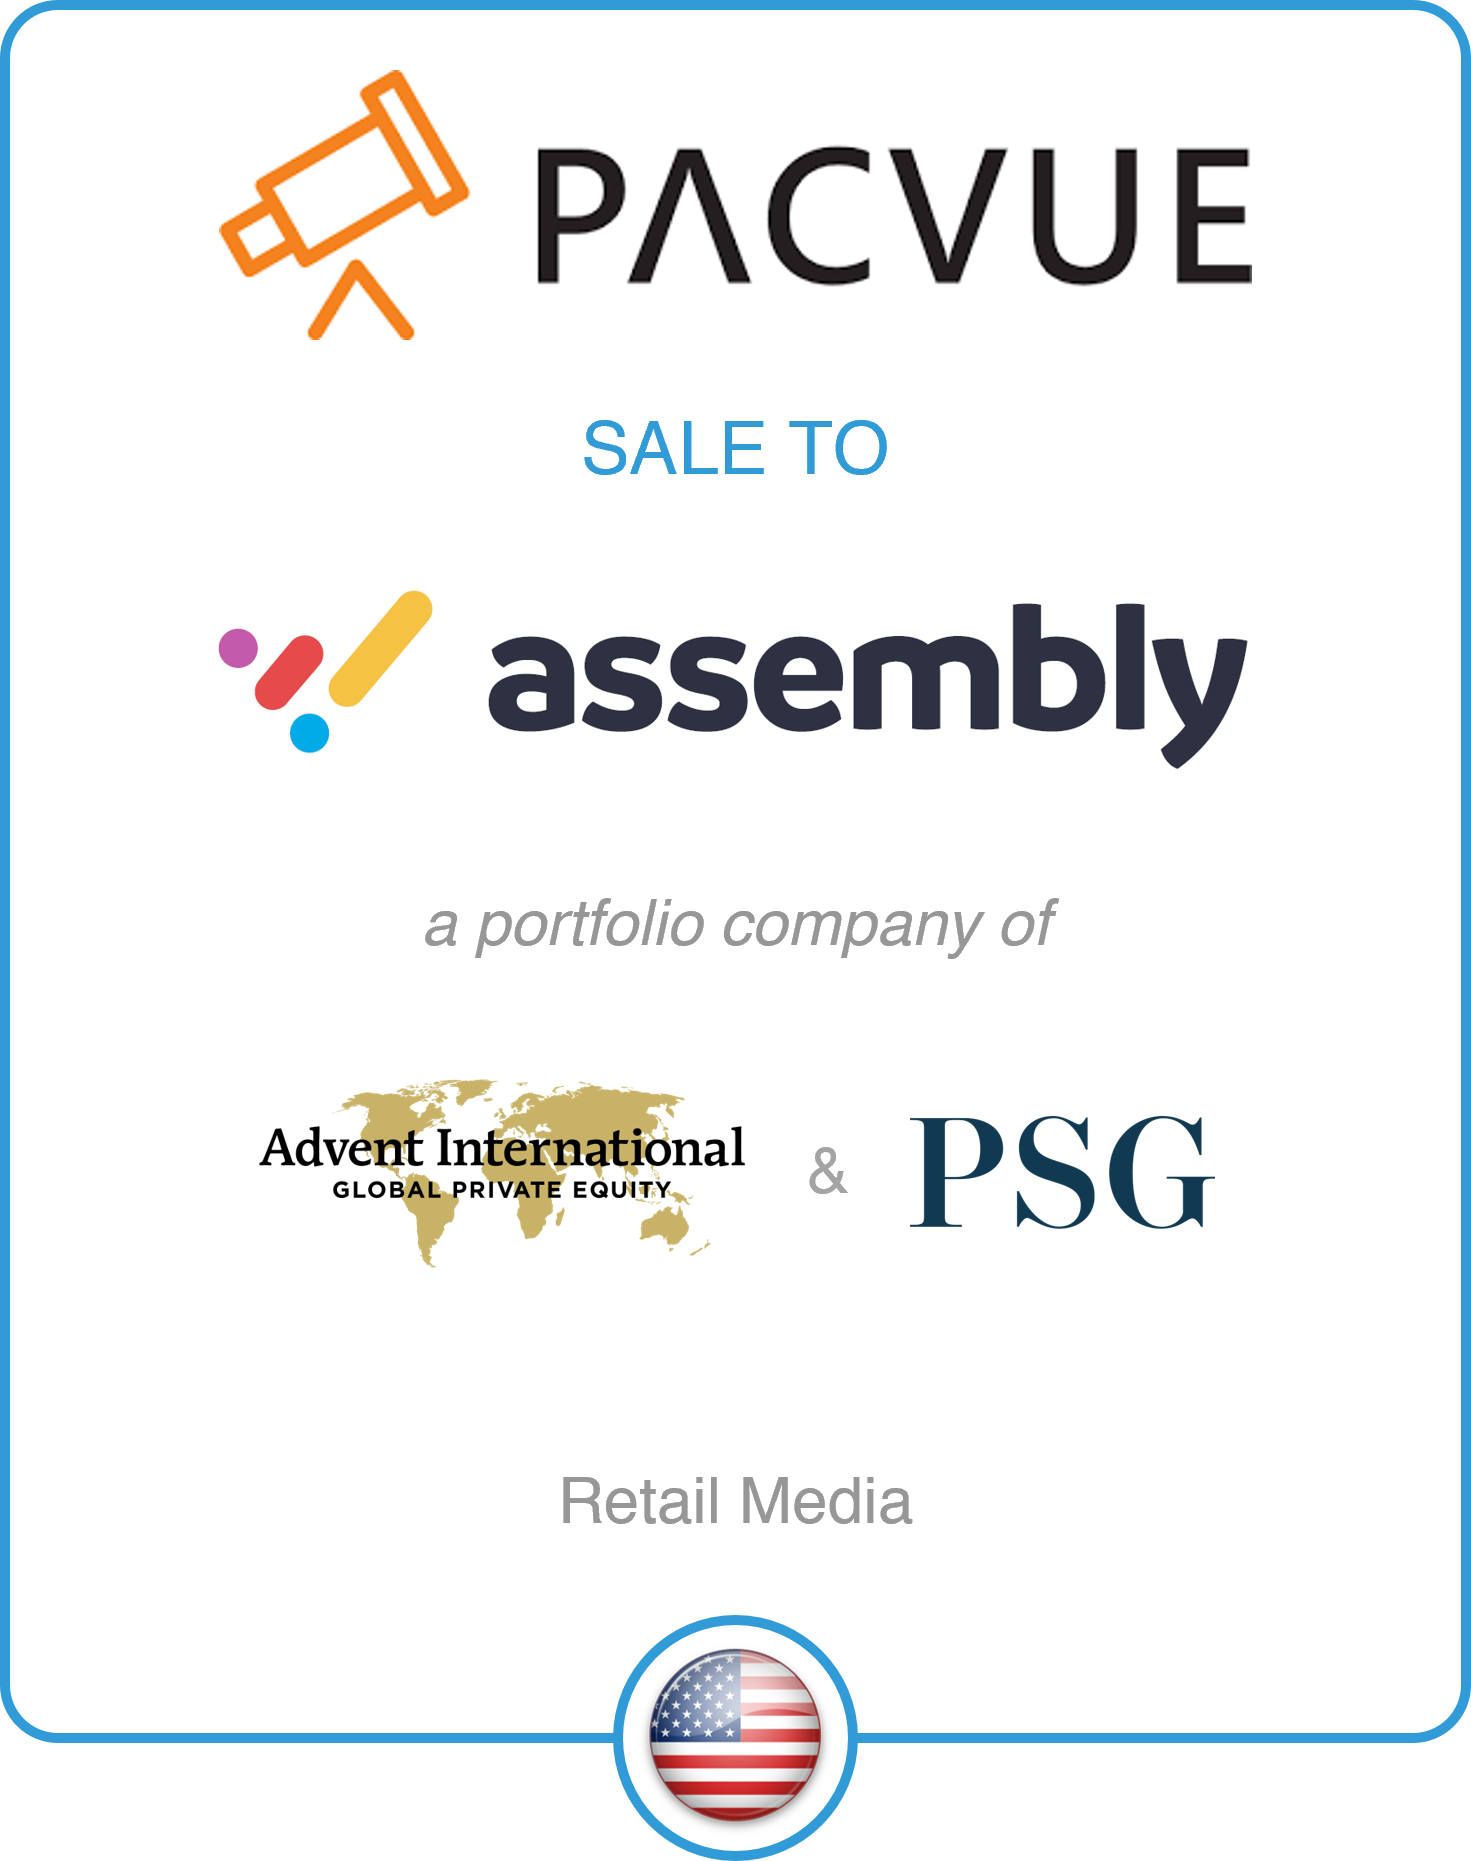 Drake Star Partners Advises Pacvue on its Sale to Assembly